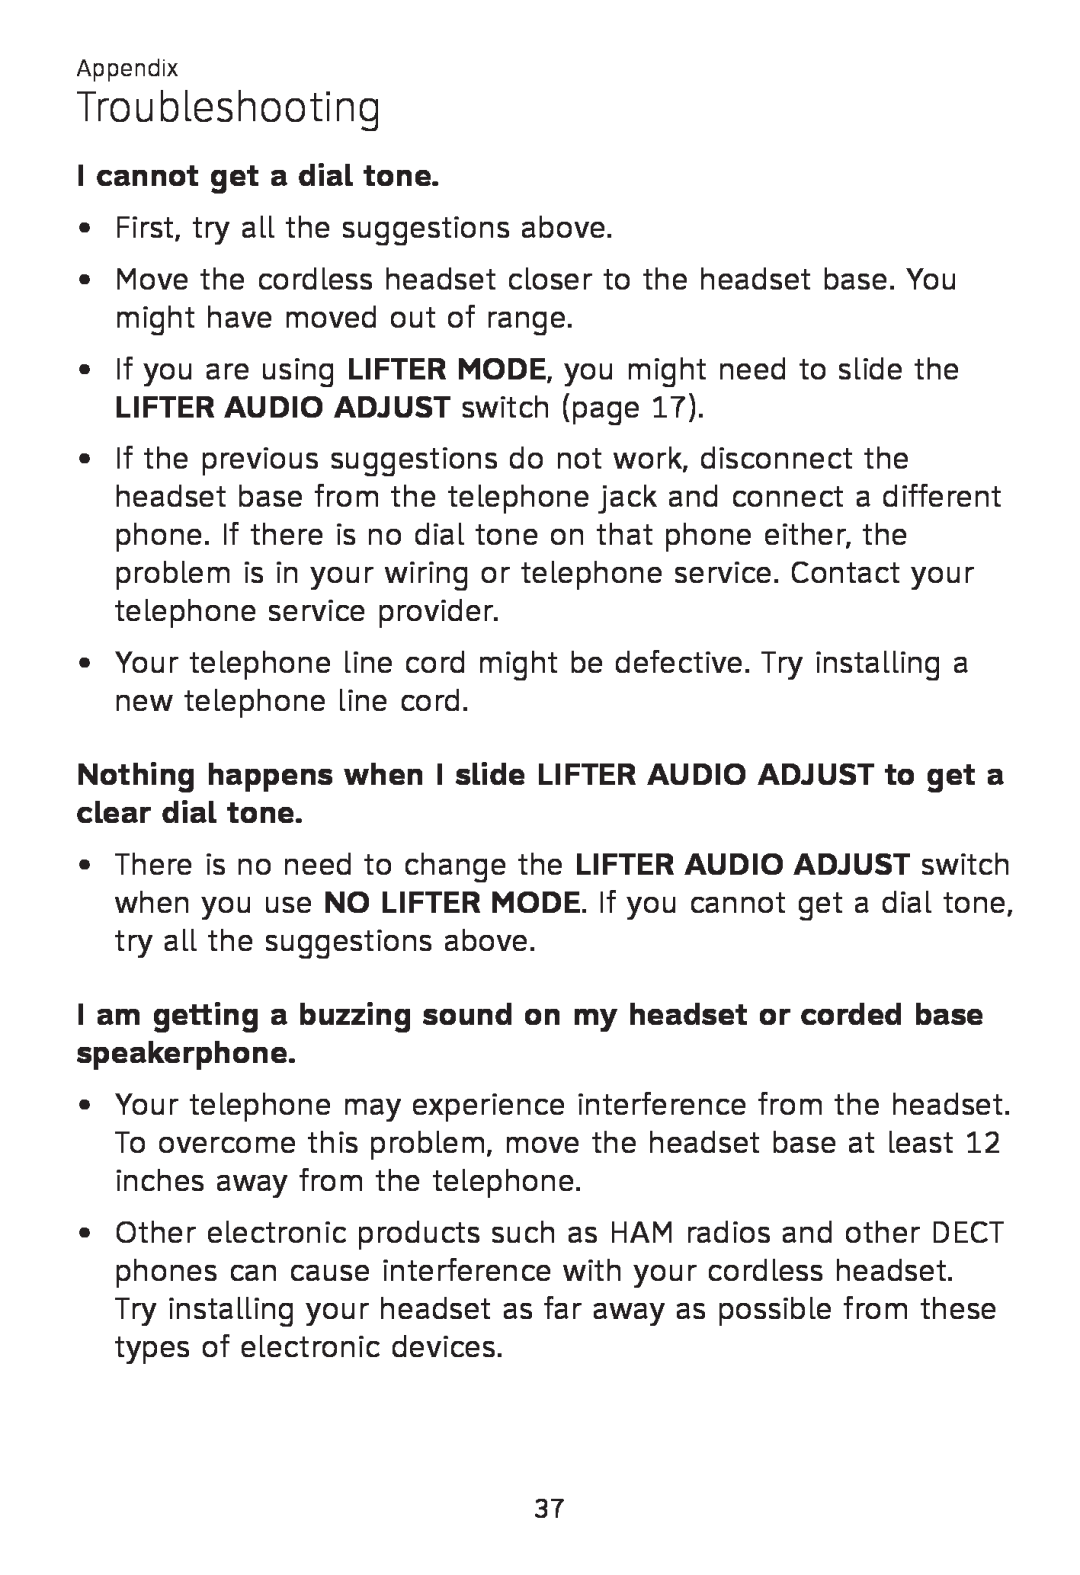 AT&T TL 7610 user manual I cannot get a dial tone, Troubleshooting 